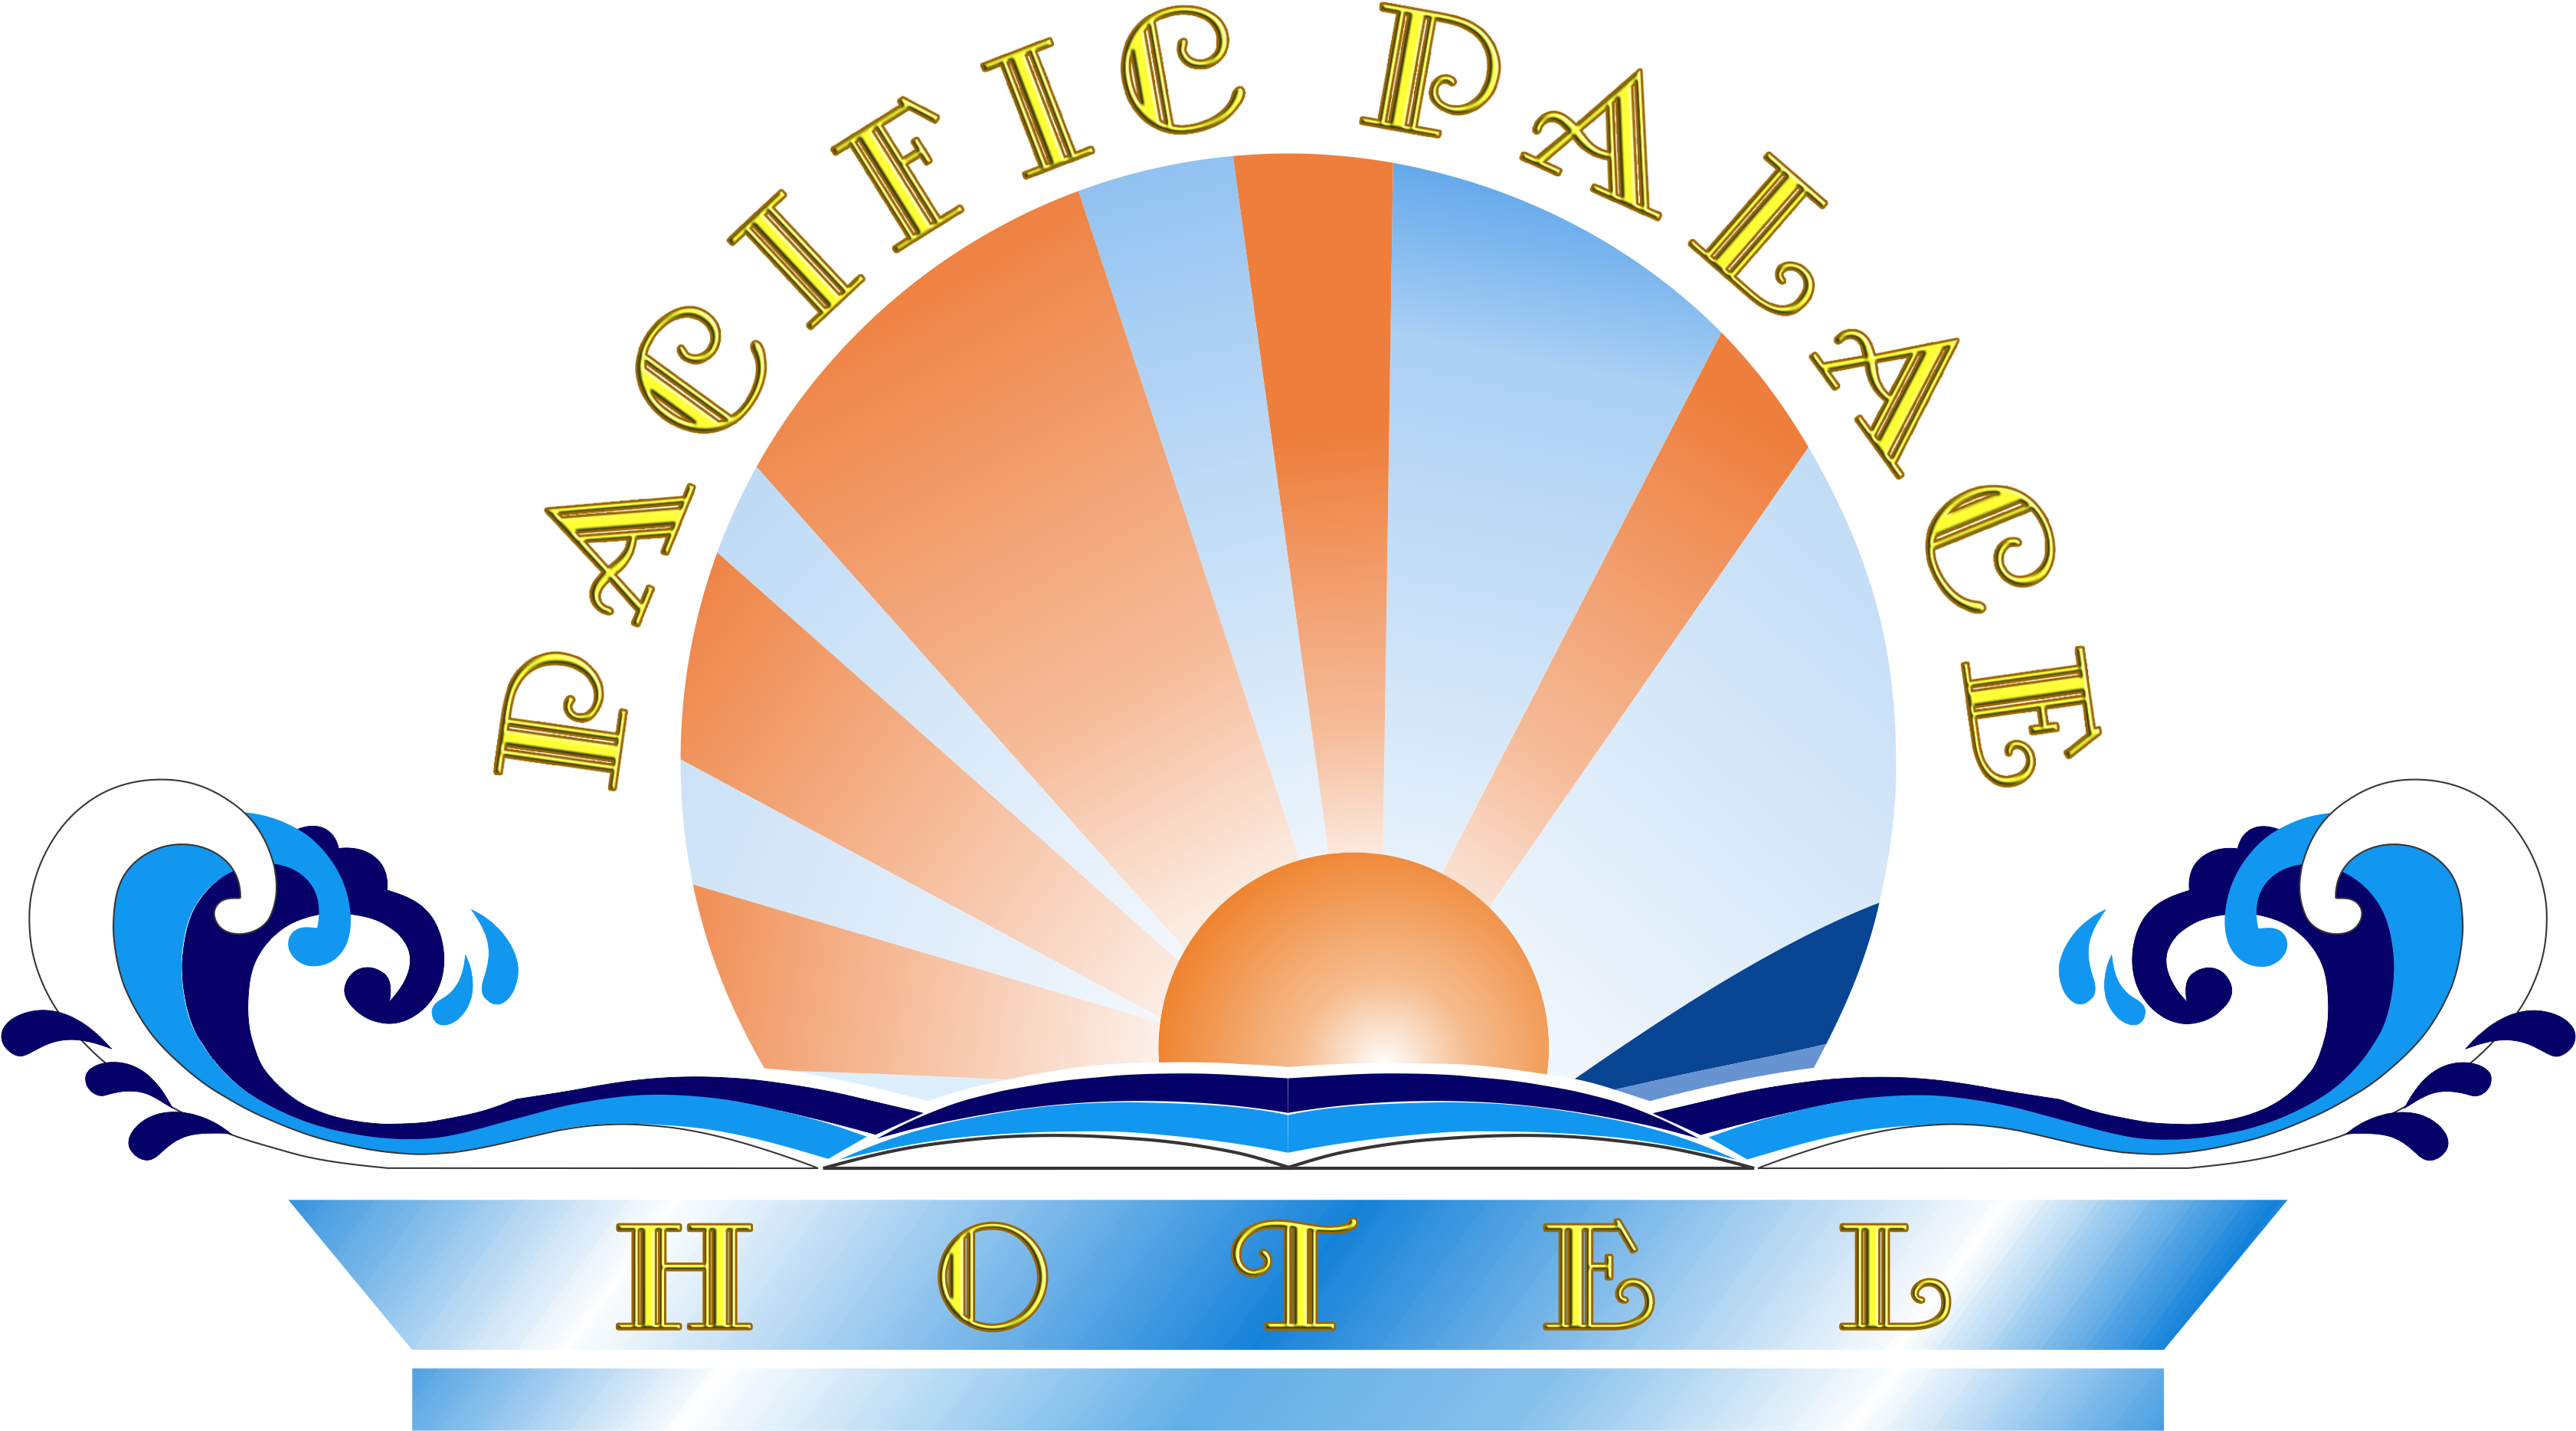 Pacific Palace Hotel Pacific Palace Hotel - Logo Pacific Palace Hotel Batam (3362x1895)